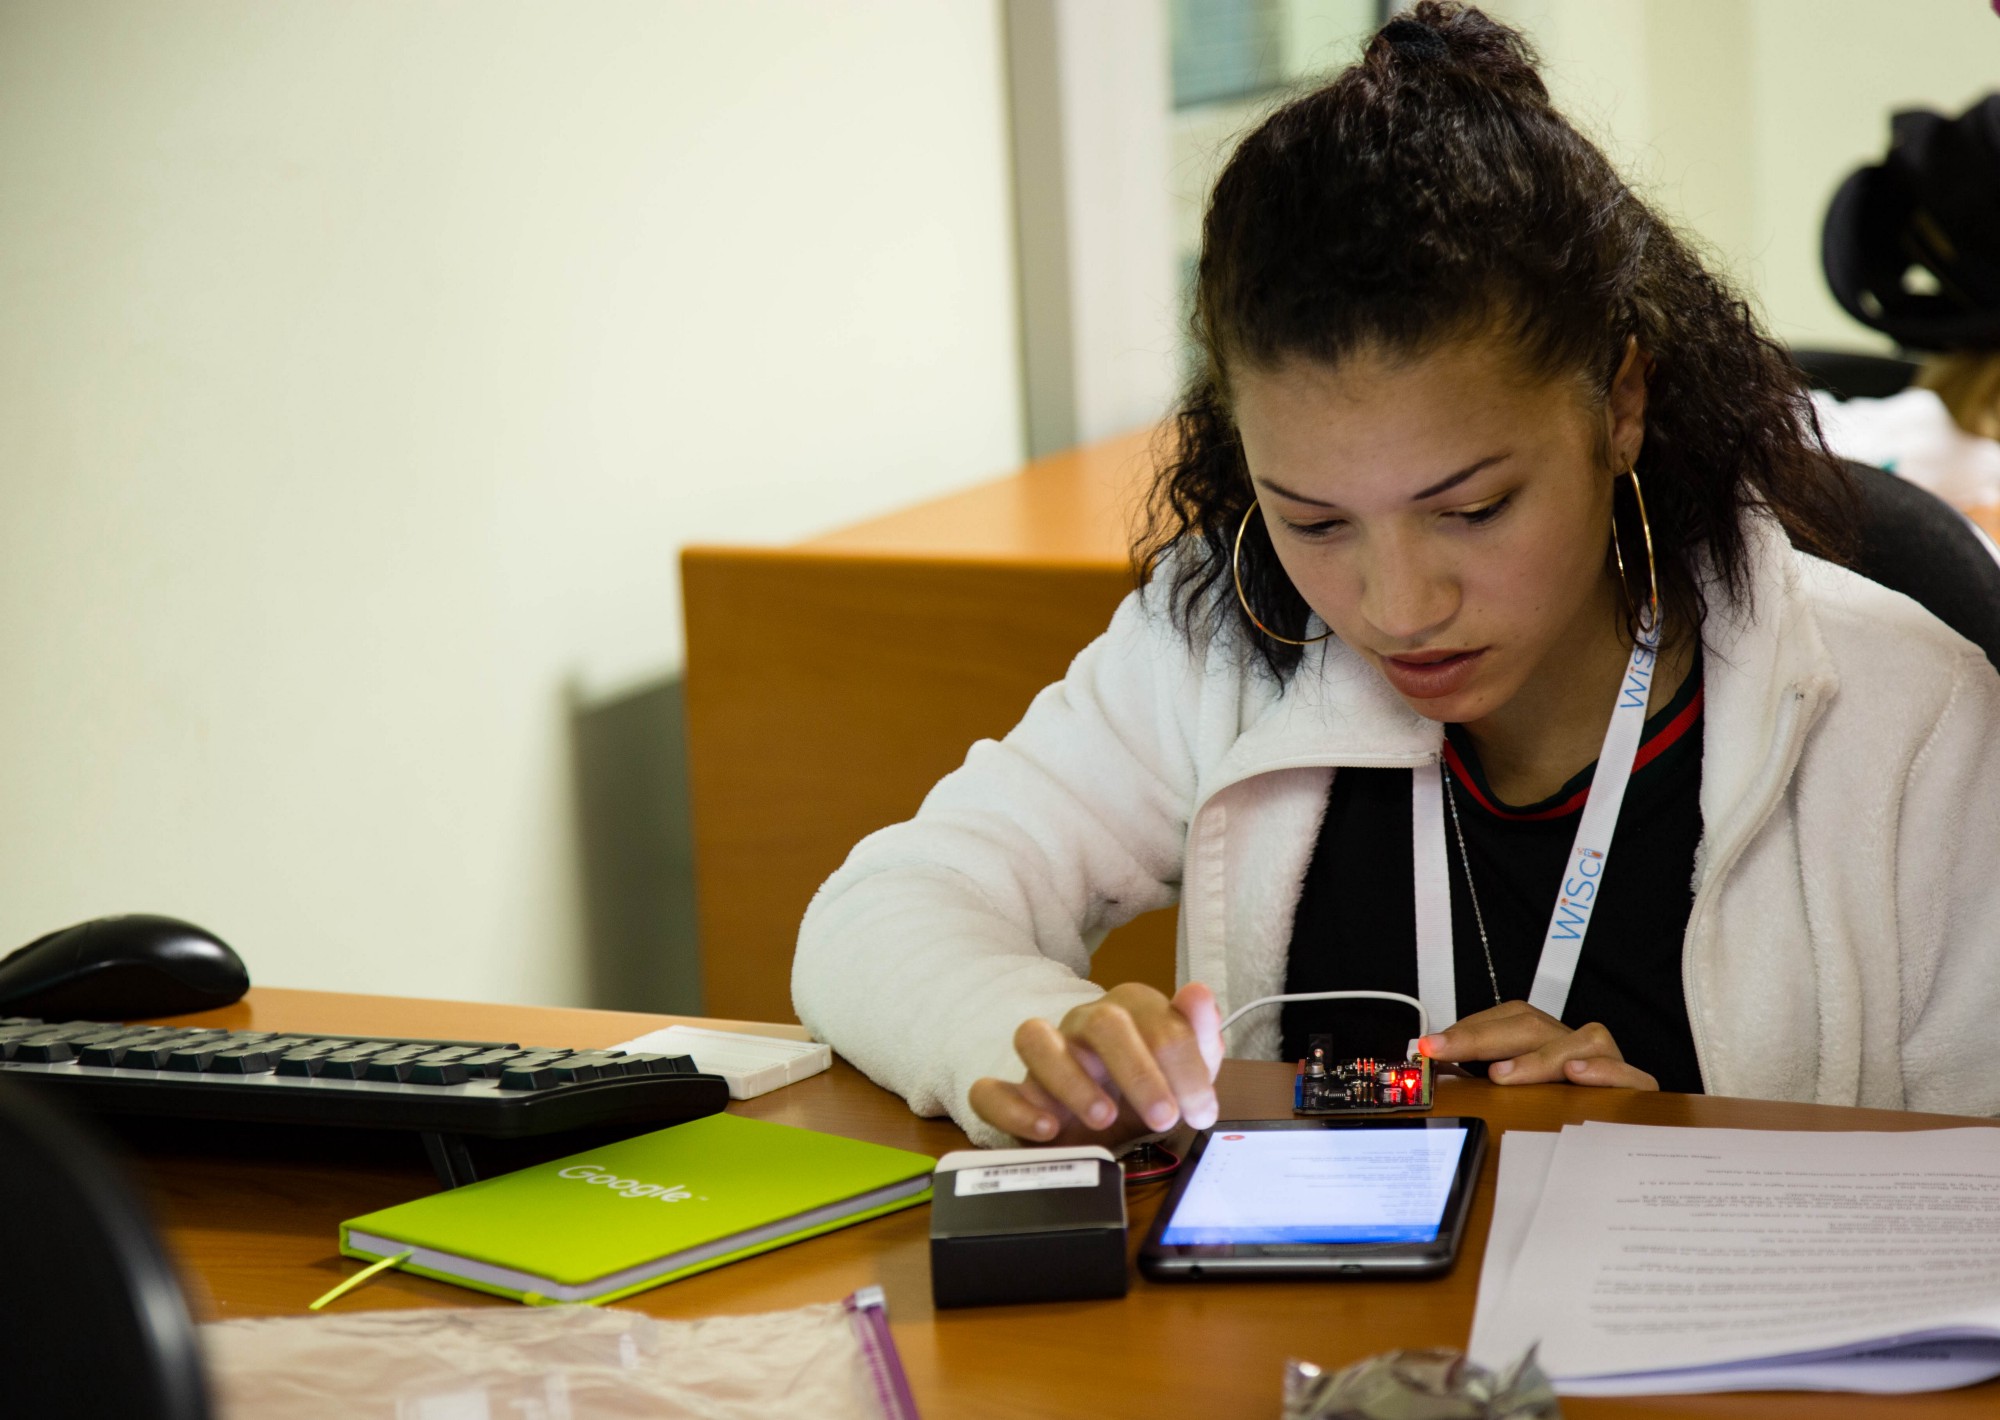 The 2018 WiSci STEAM Camp Kicks Off with NASA, Google, and Teen Girls From Five Countries